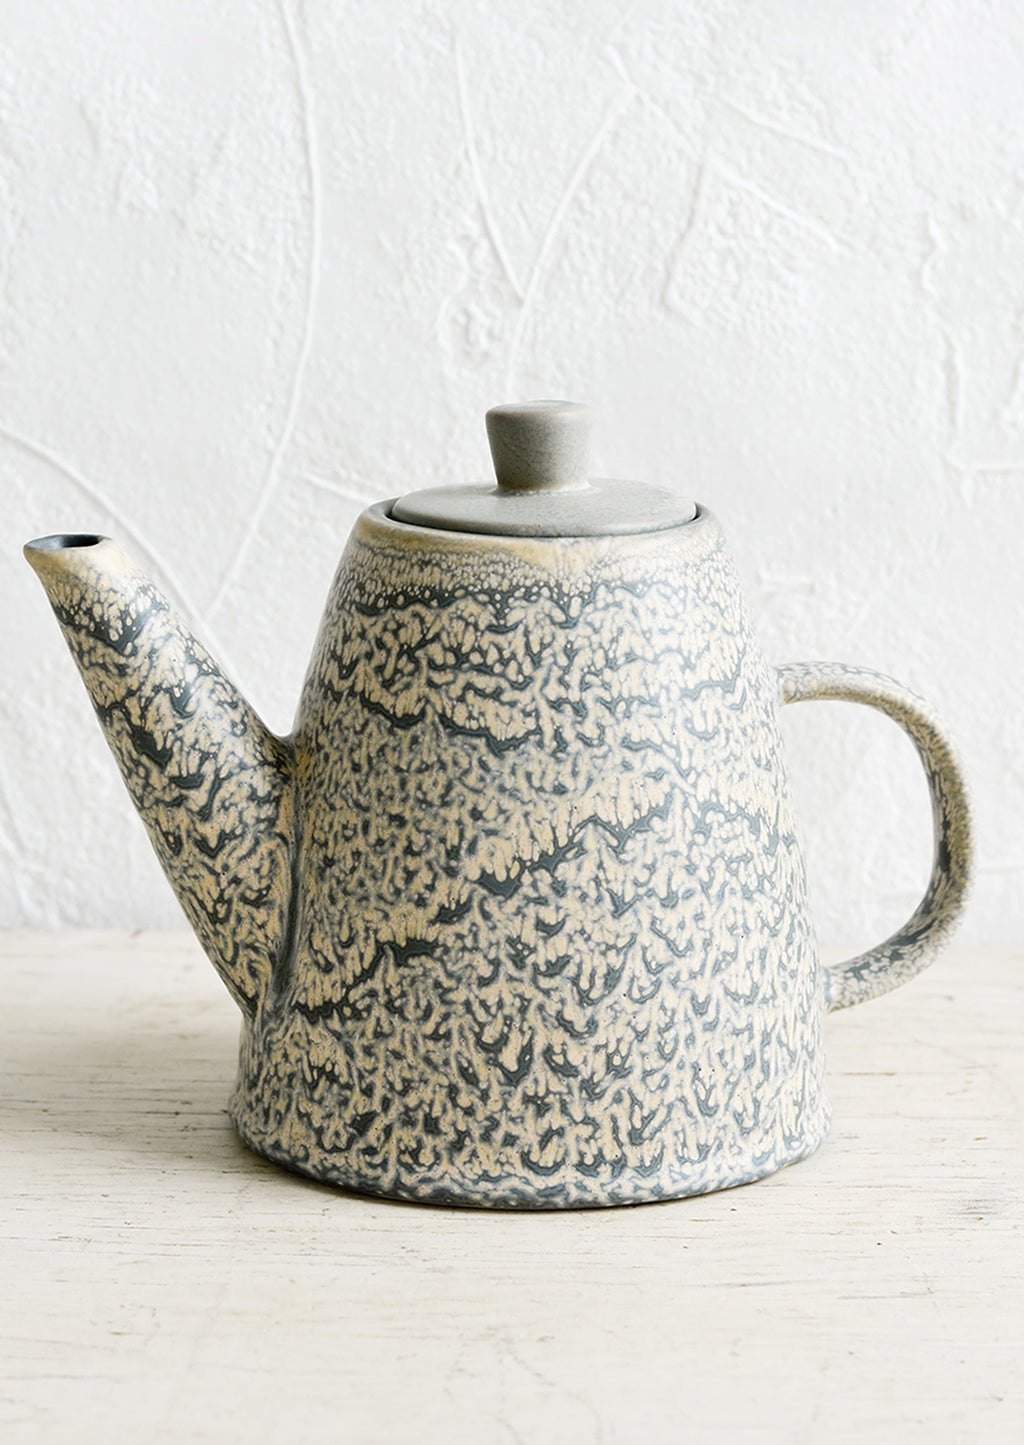 1: A ceramic lidded teapot in grey and natural speckled glaze.